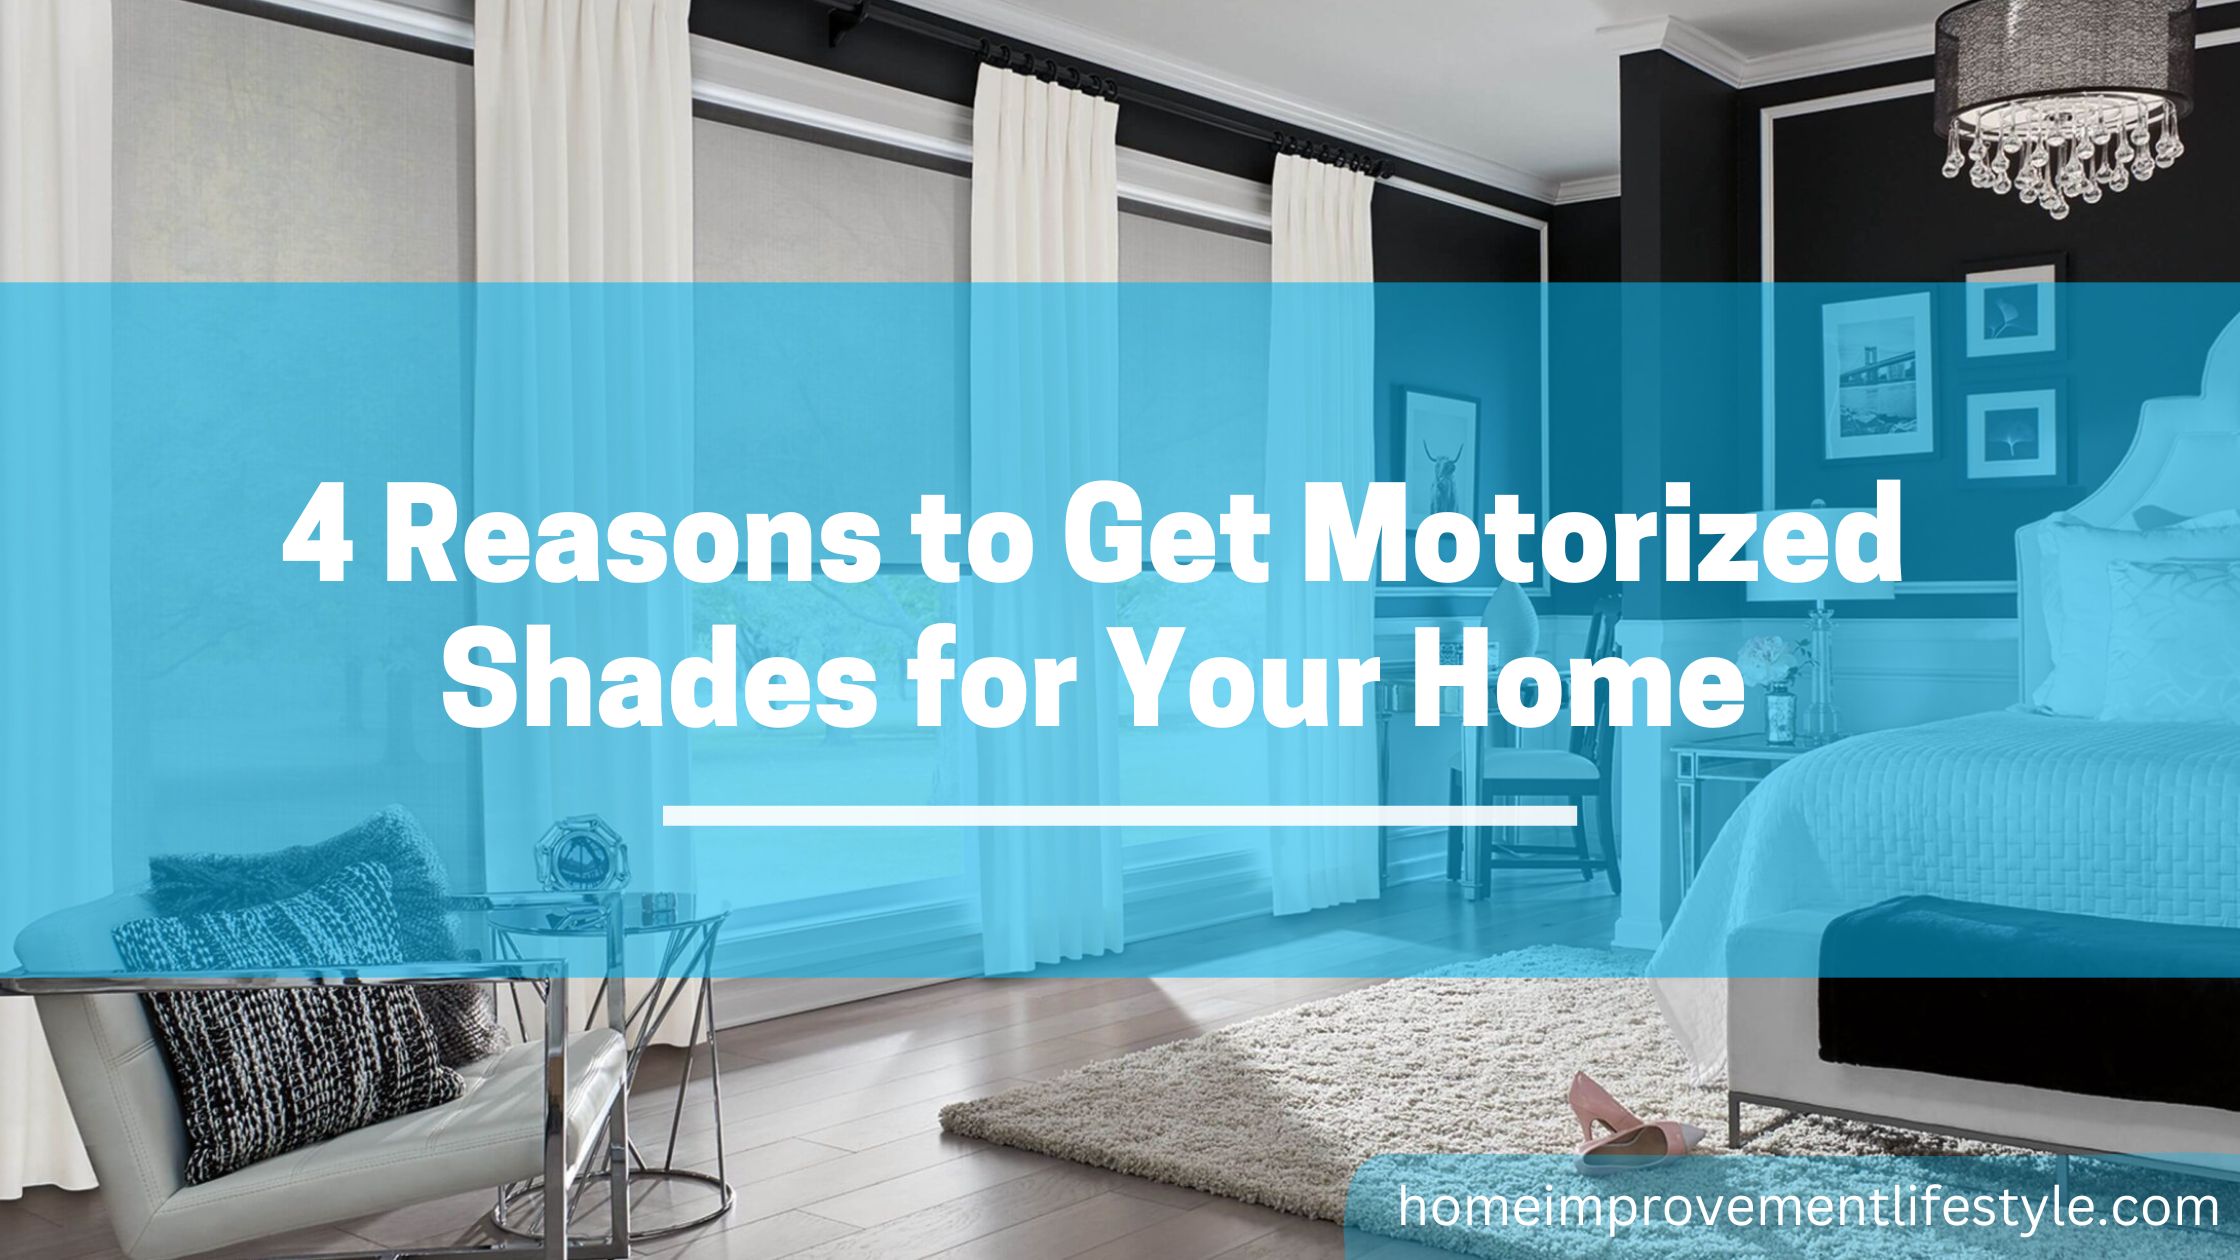 4 Reasons to Get Motorized Shades for Your Home